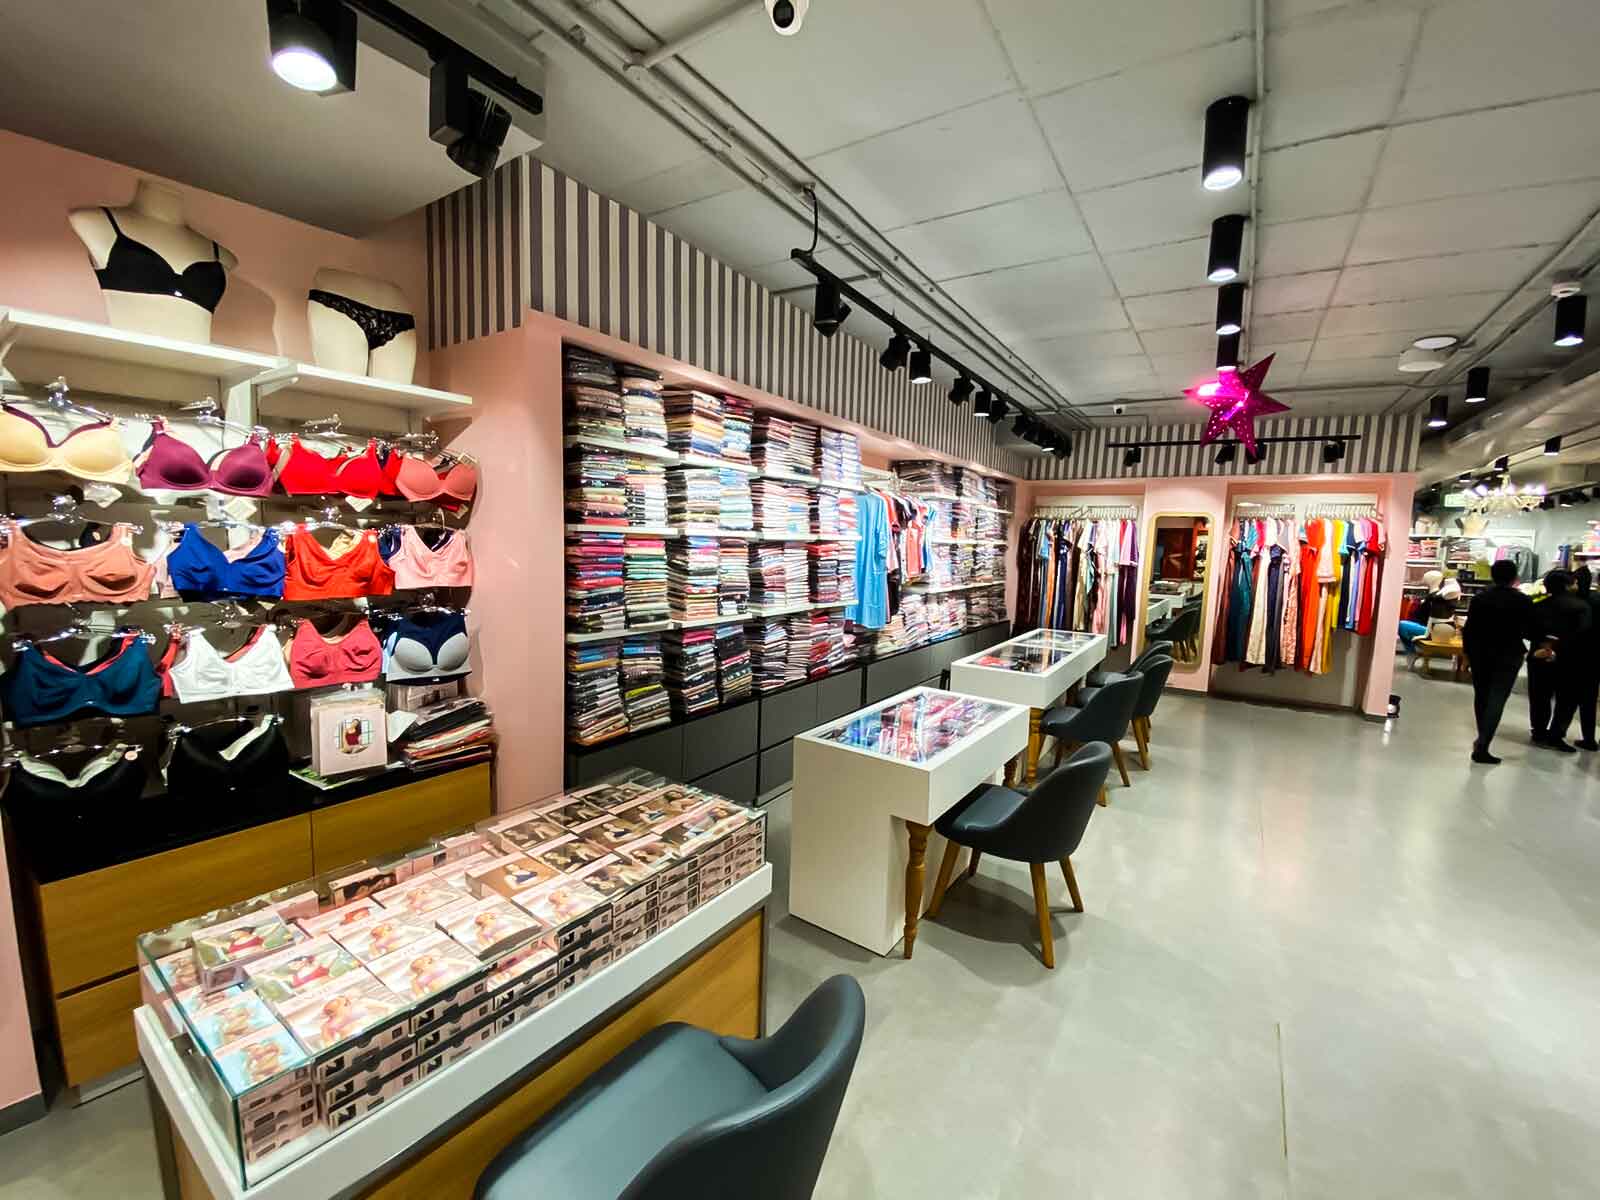 Inside store view, cloths on shelves